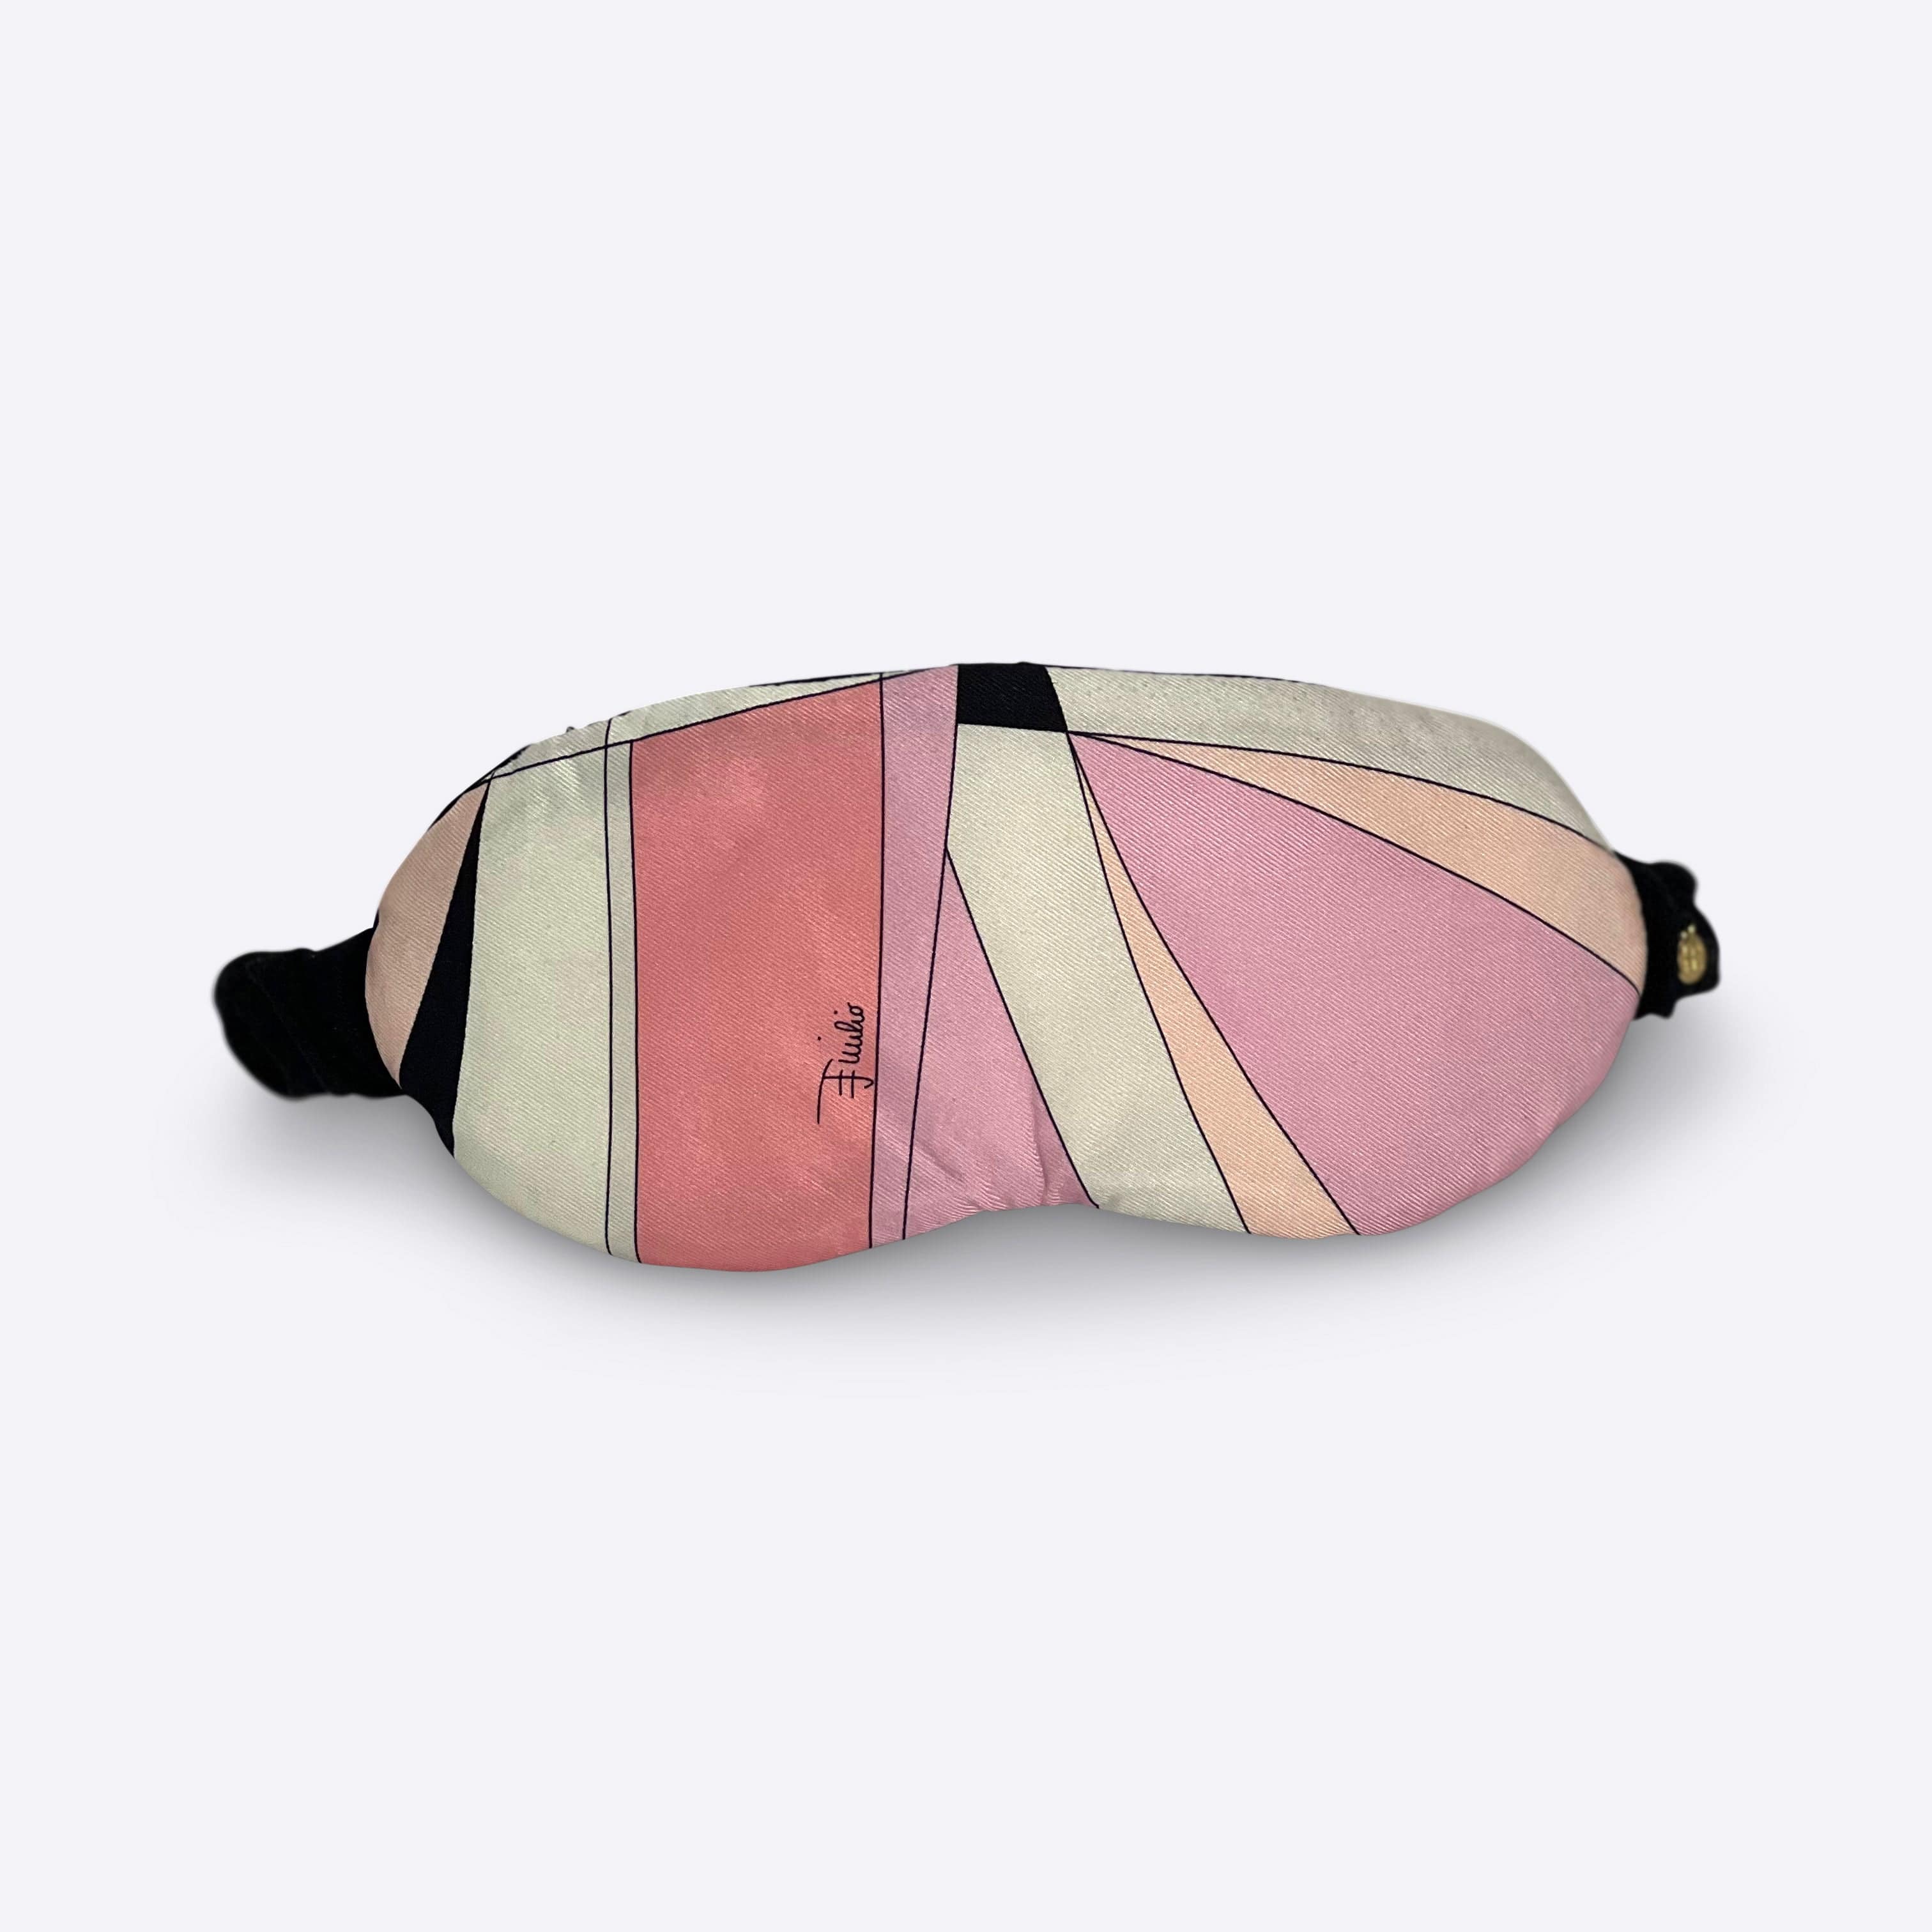 Sweet Dreams Sleep Mask (Upcycled From Emilio Pucci Scarf) – Hampton Road  Designs